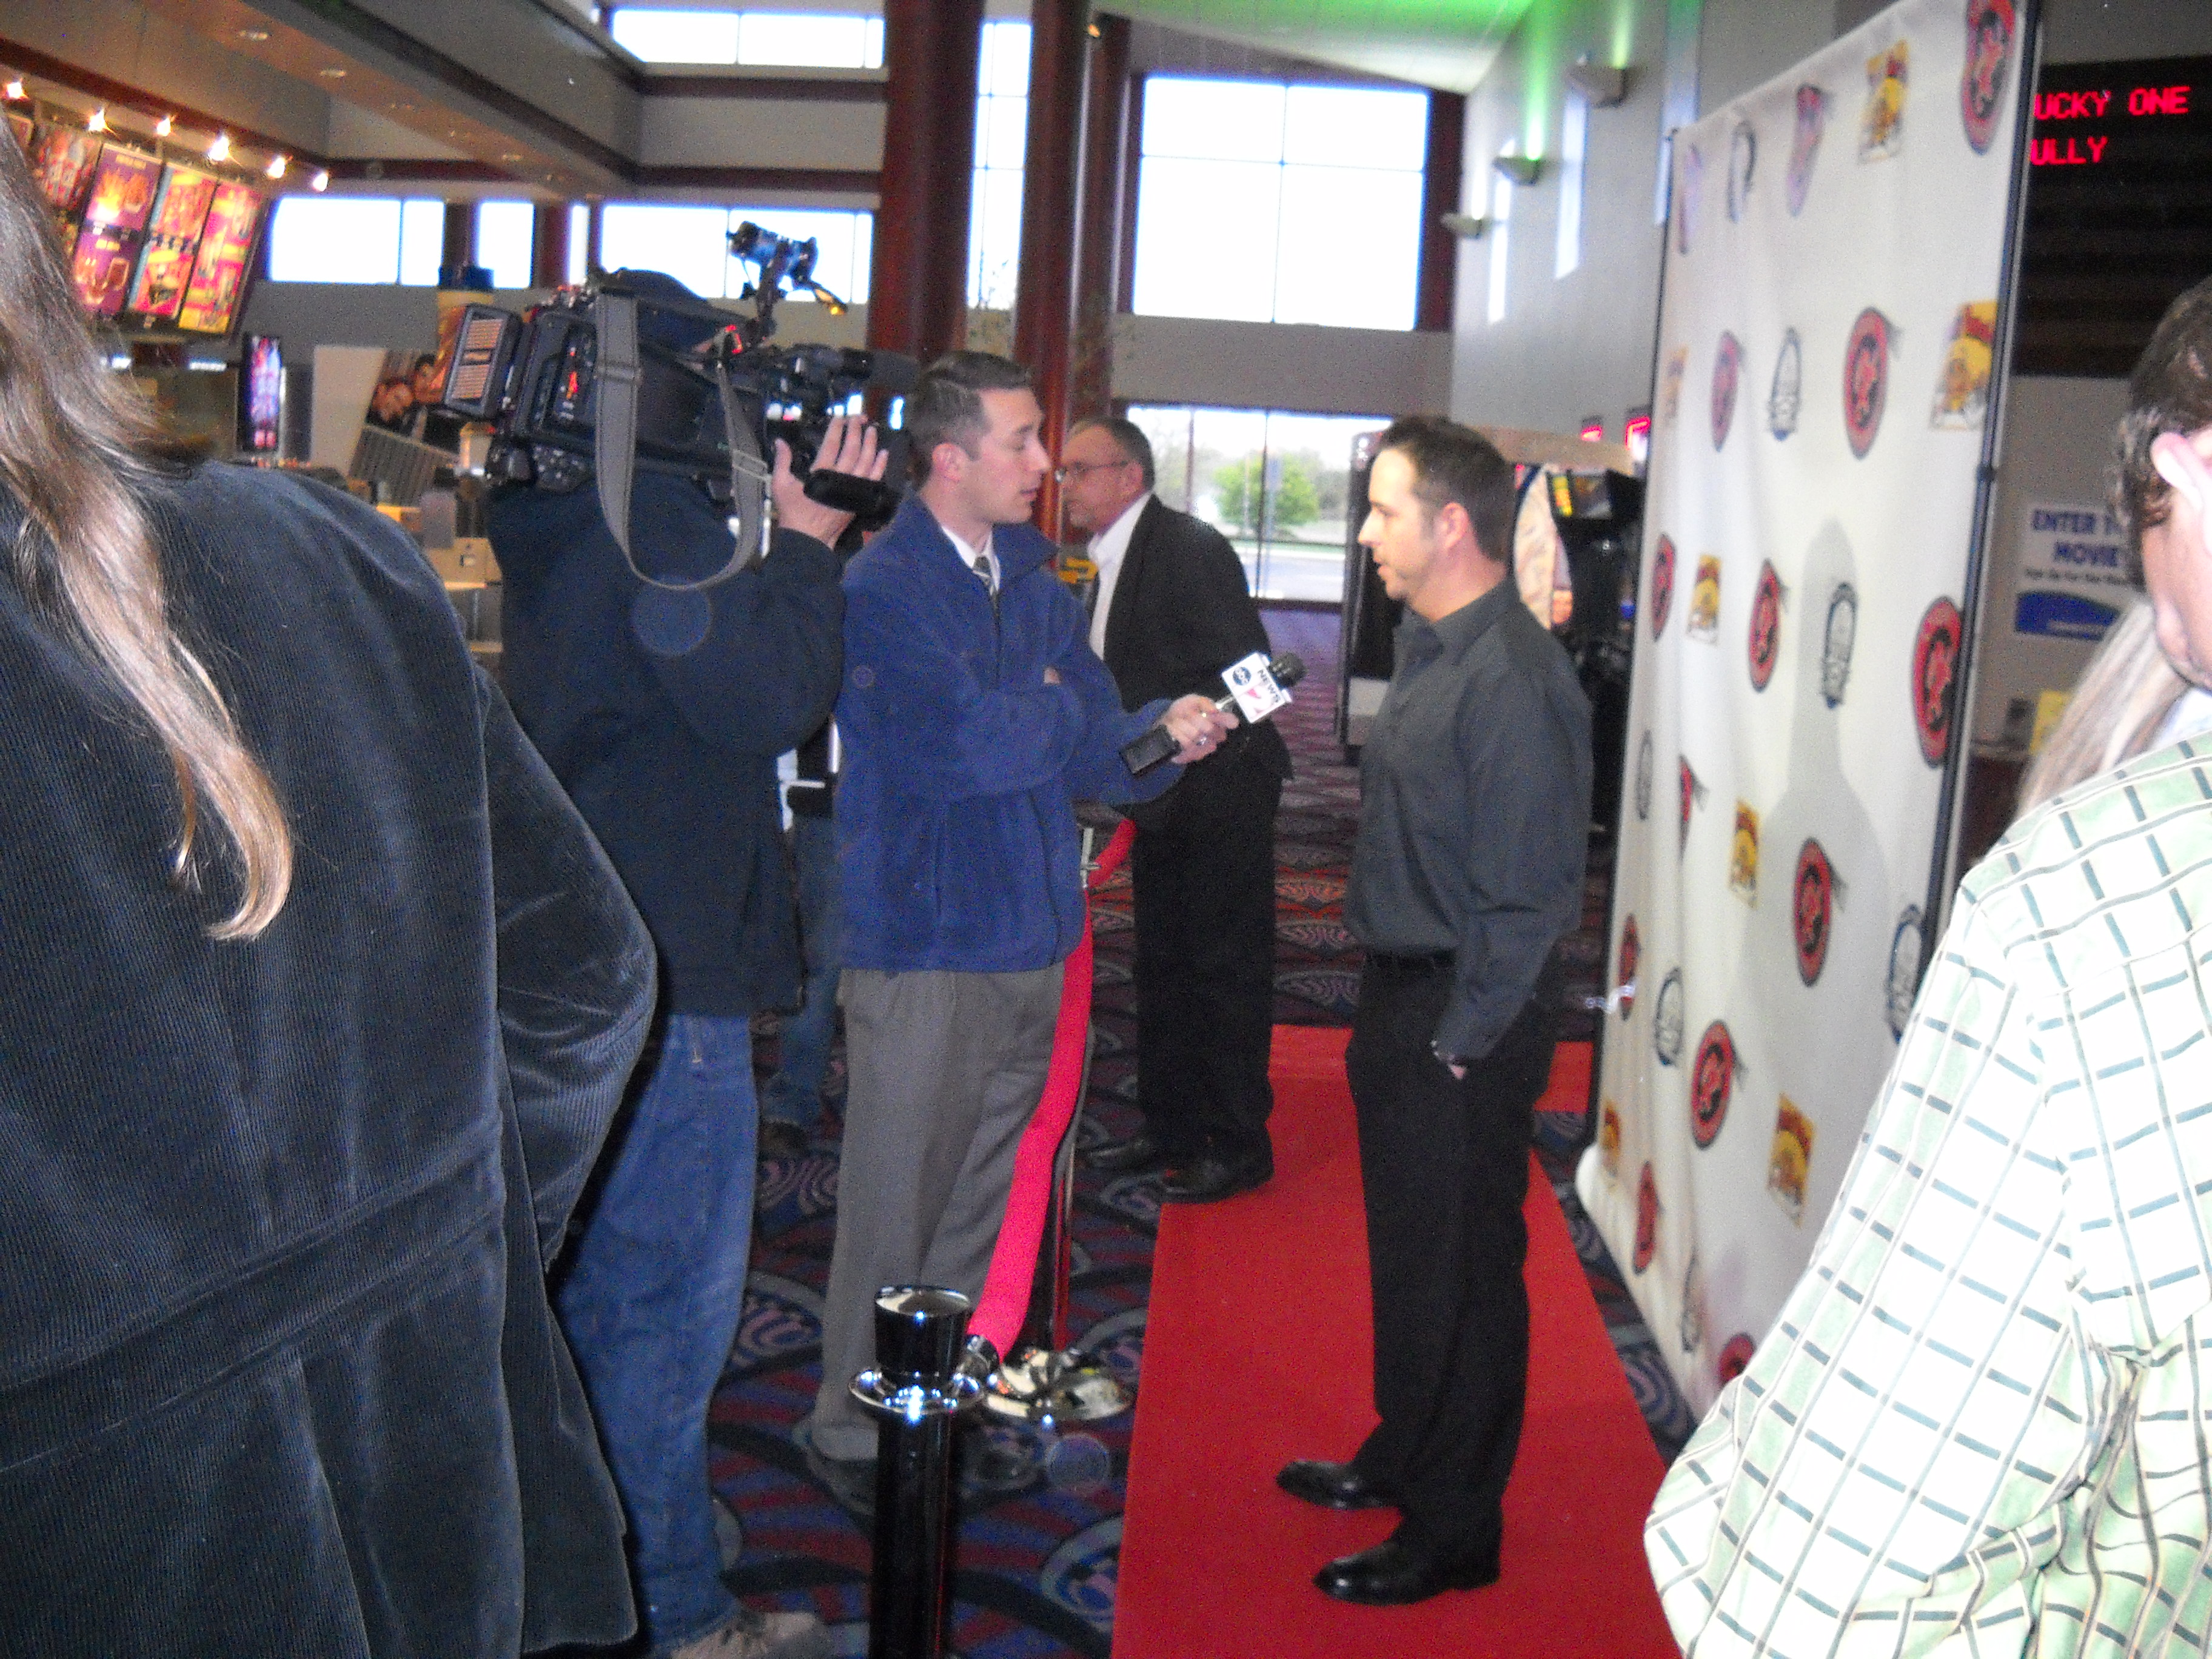 Nicholas Joseph Mackey being interviewed by Justin Betti of ABC 12 News @Premiere of Little Creeps